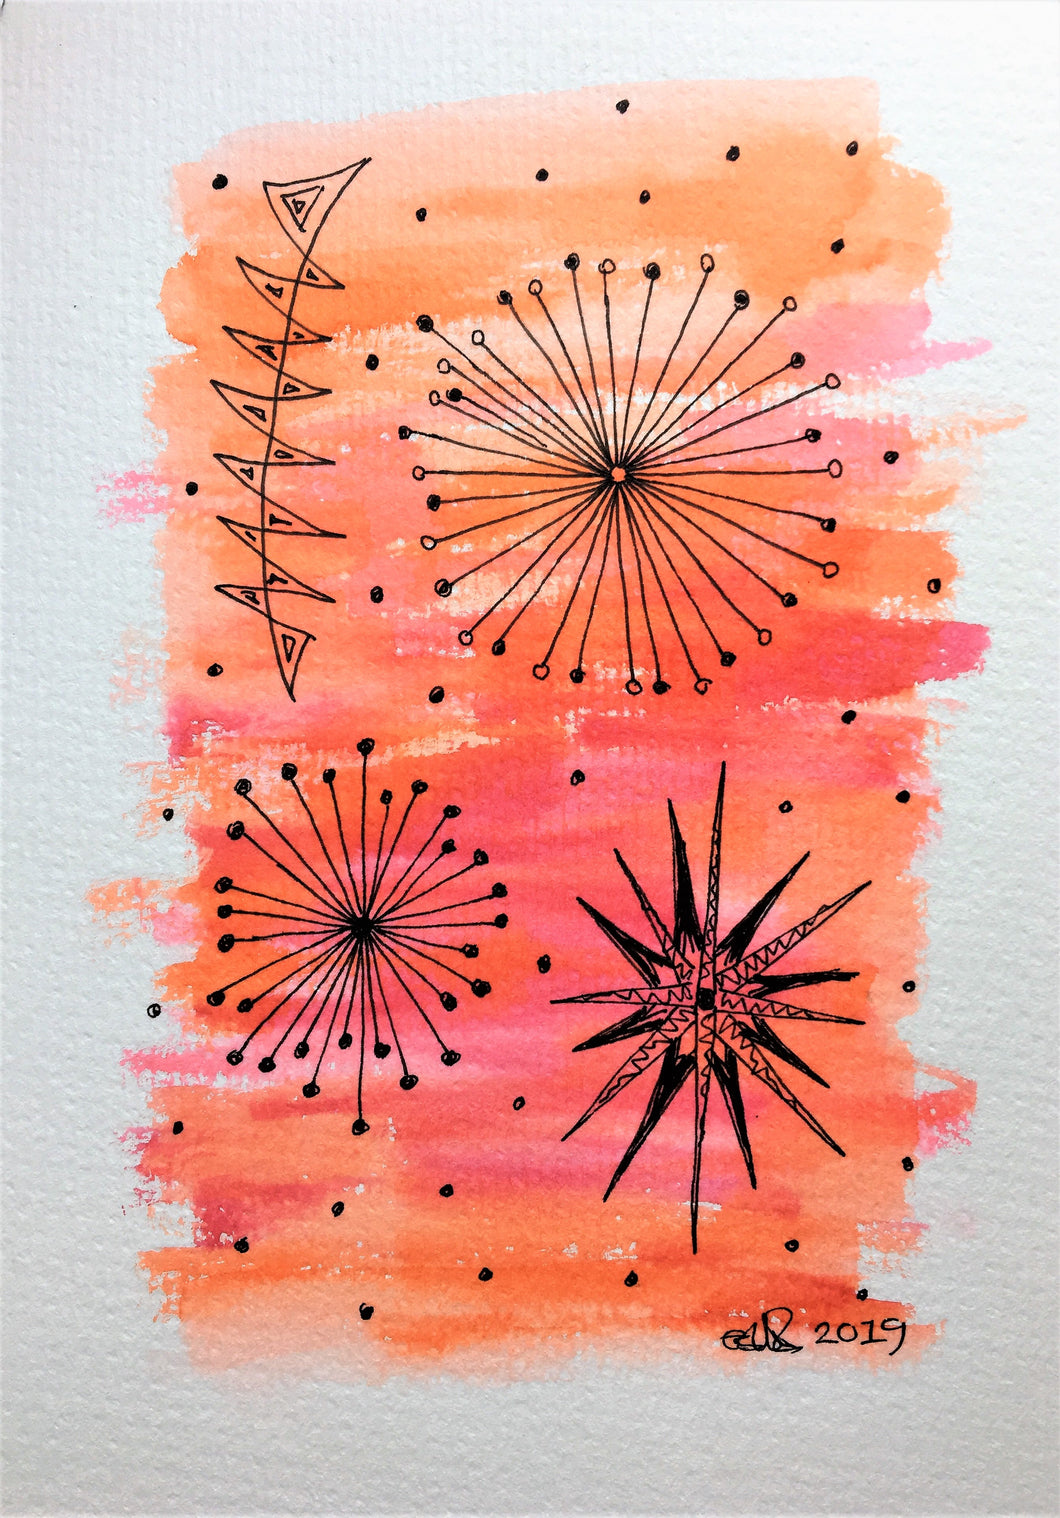 Handpainted Watercolour Greeting Card - Abstract Red/Orange/Pink with Circle/Star Design - eDgE dEsiGn London